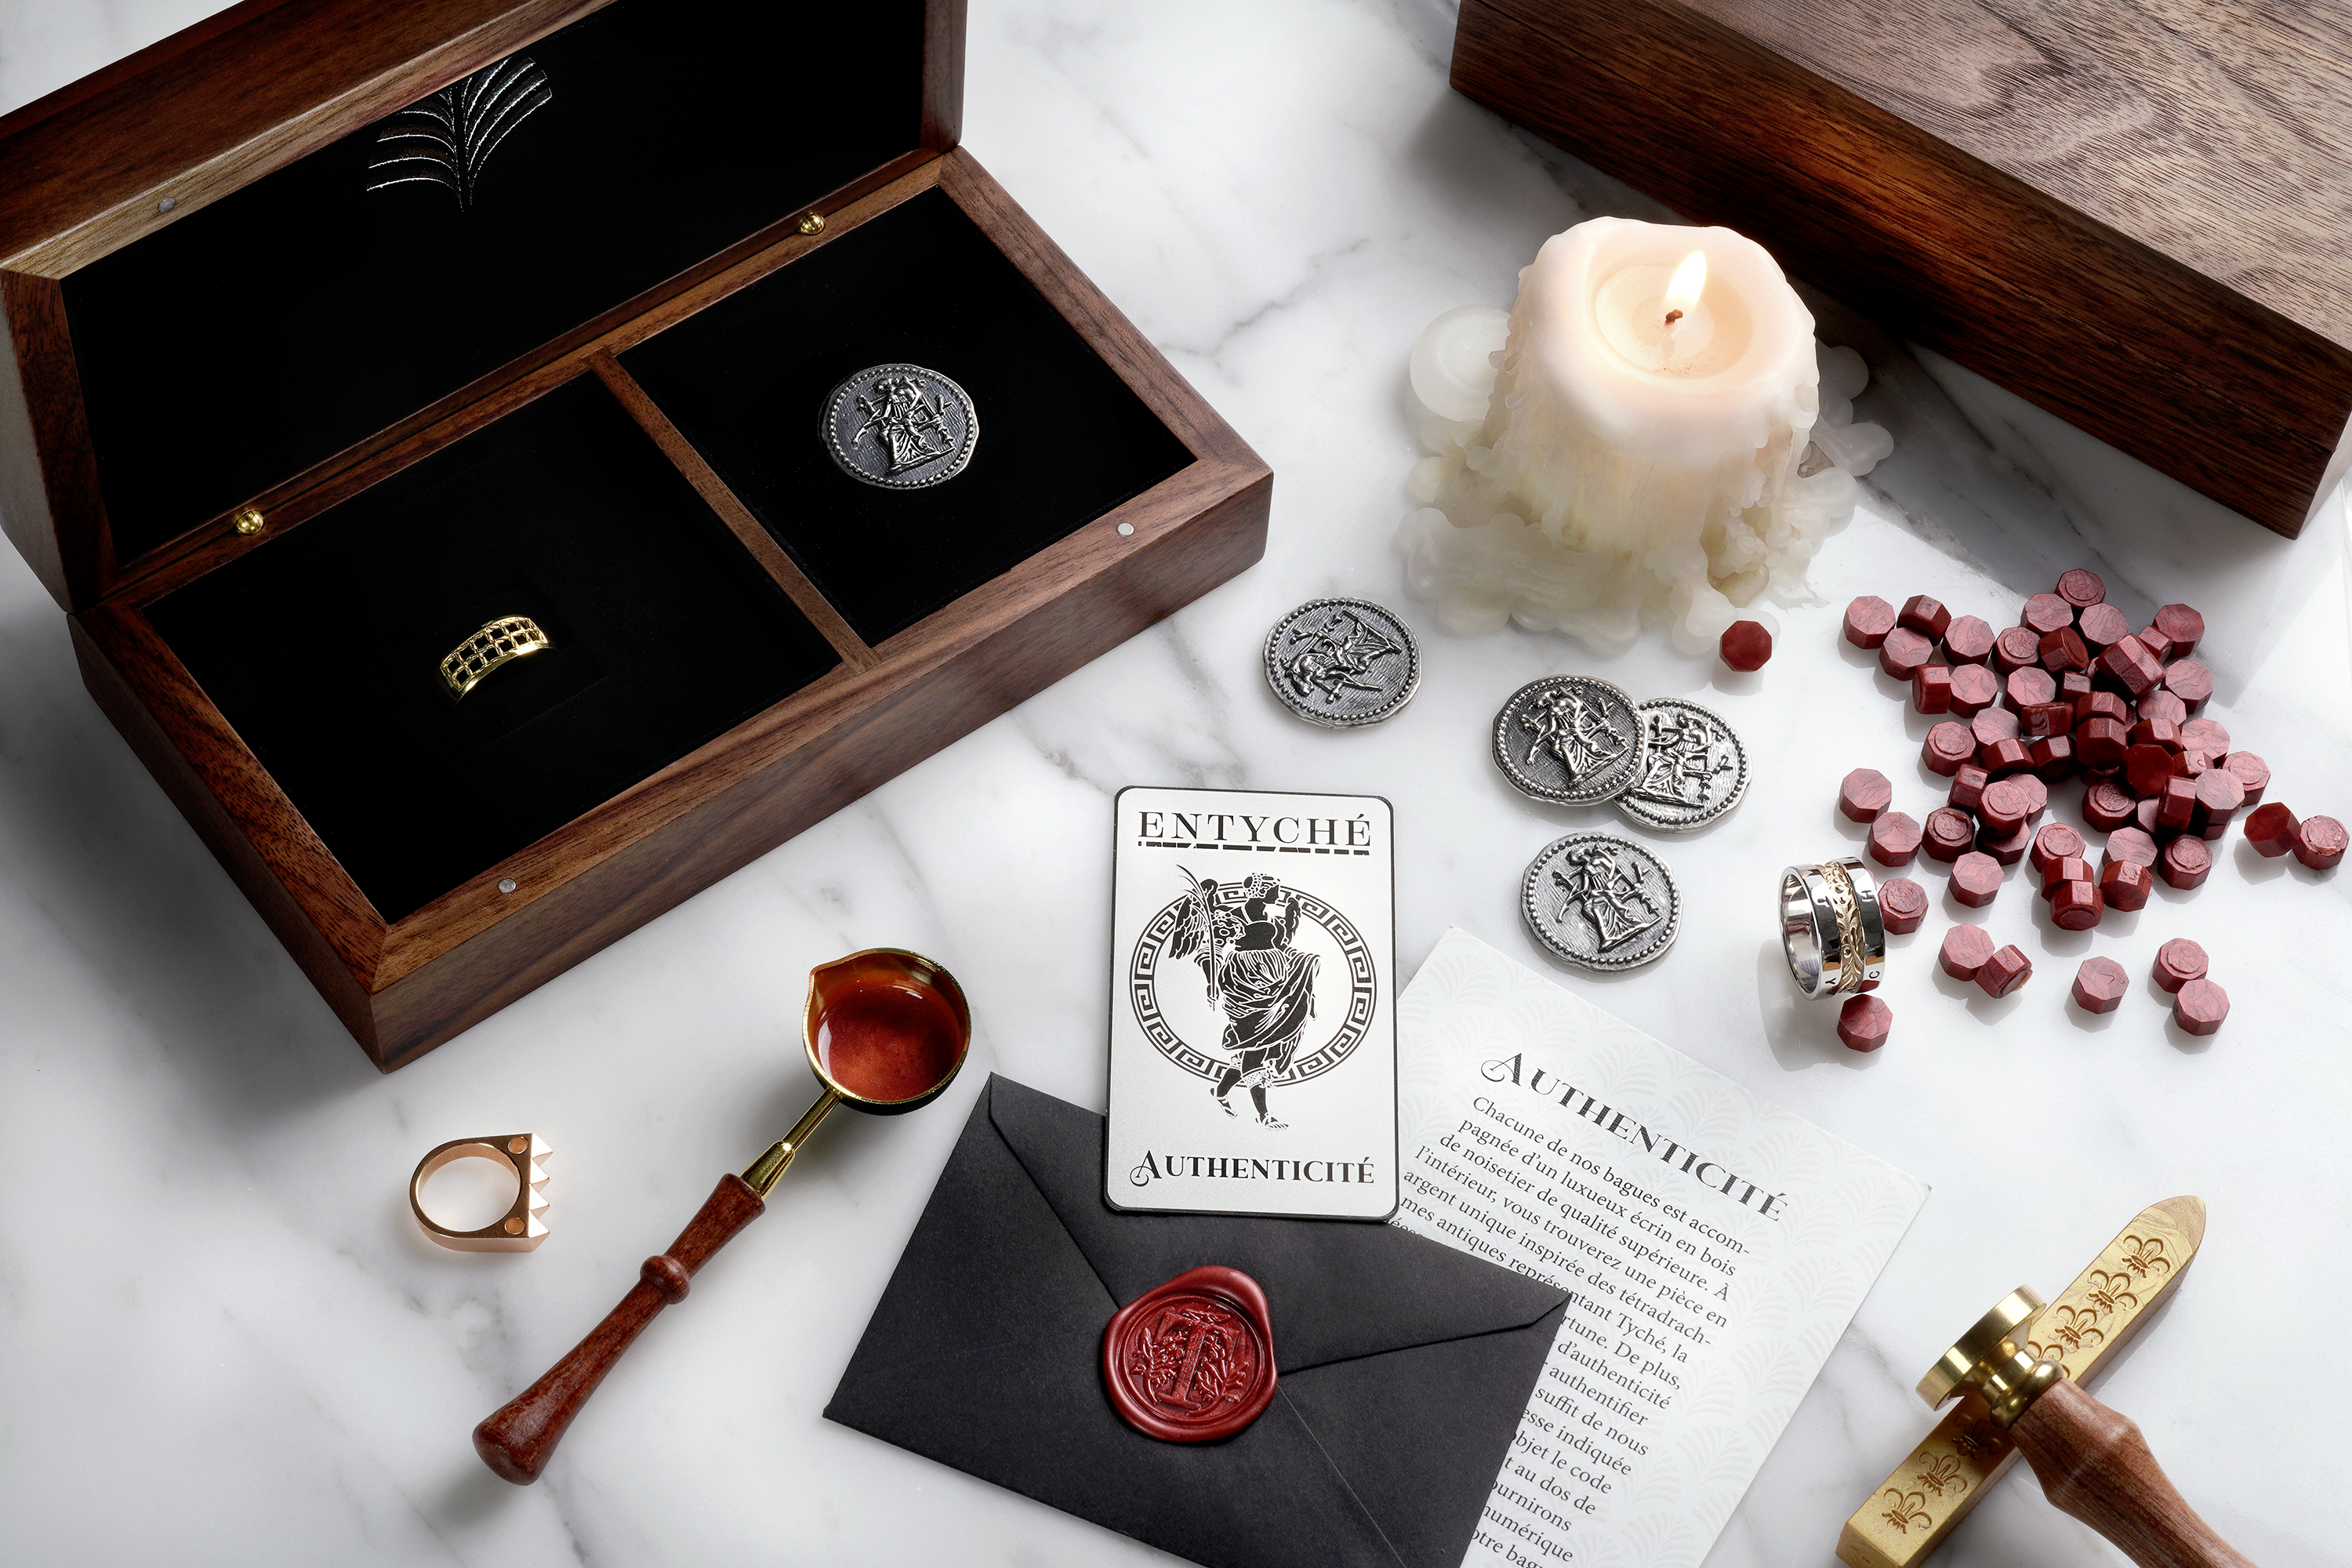 Entyché wooden box containing our Venture 14k gold ring and our signature coin. Laid in front of the box are our Tamkeen 14k rose gold ring, our Cambiante 14k gold and silver ring, our metal authenticity card as well as other packaging materials.